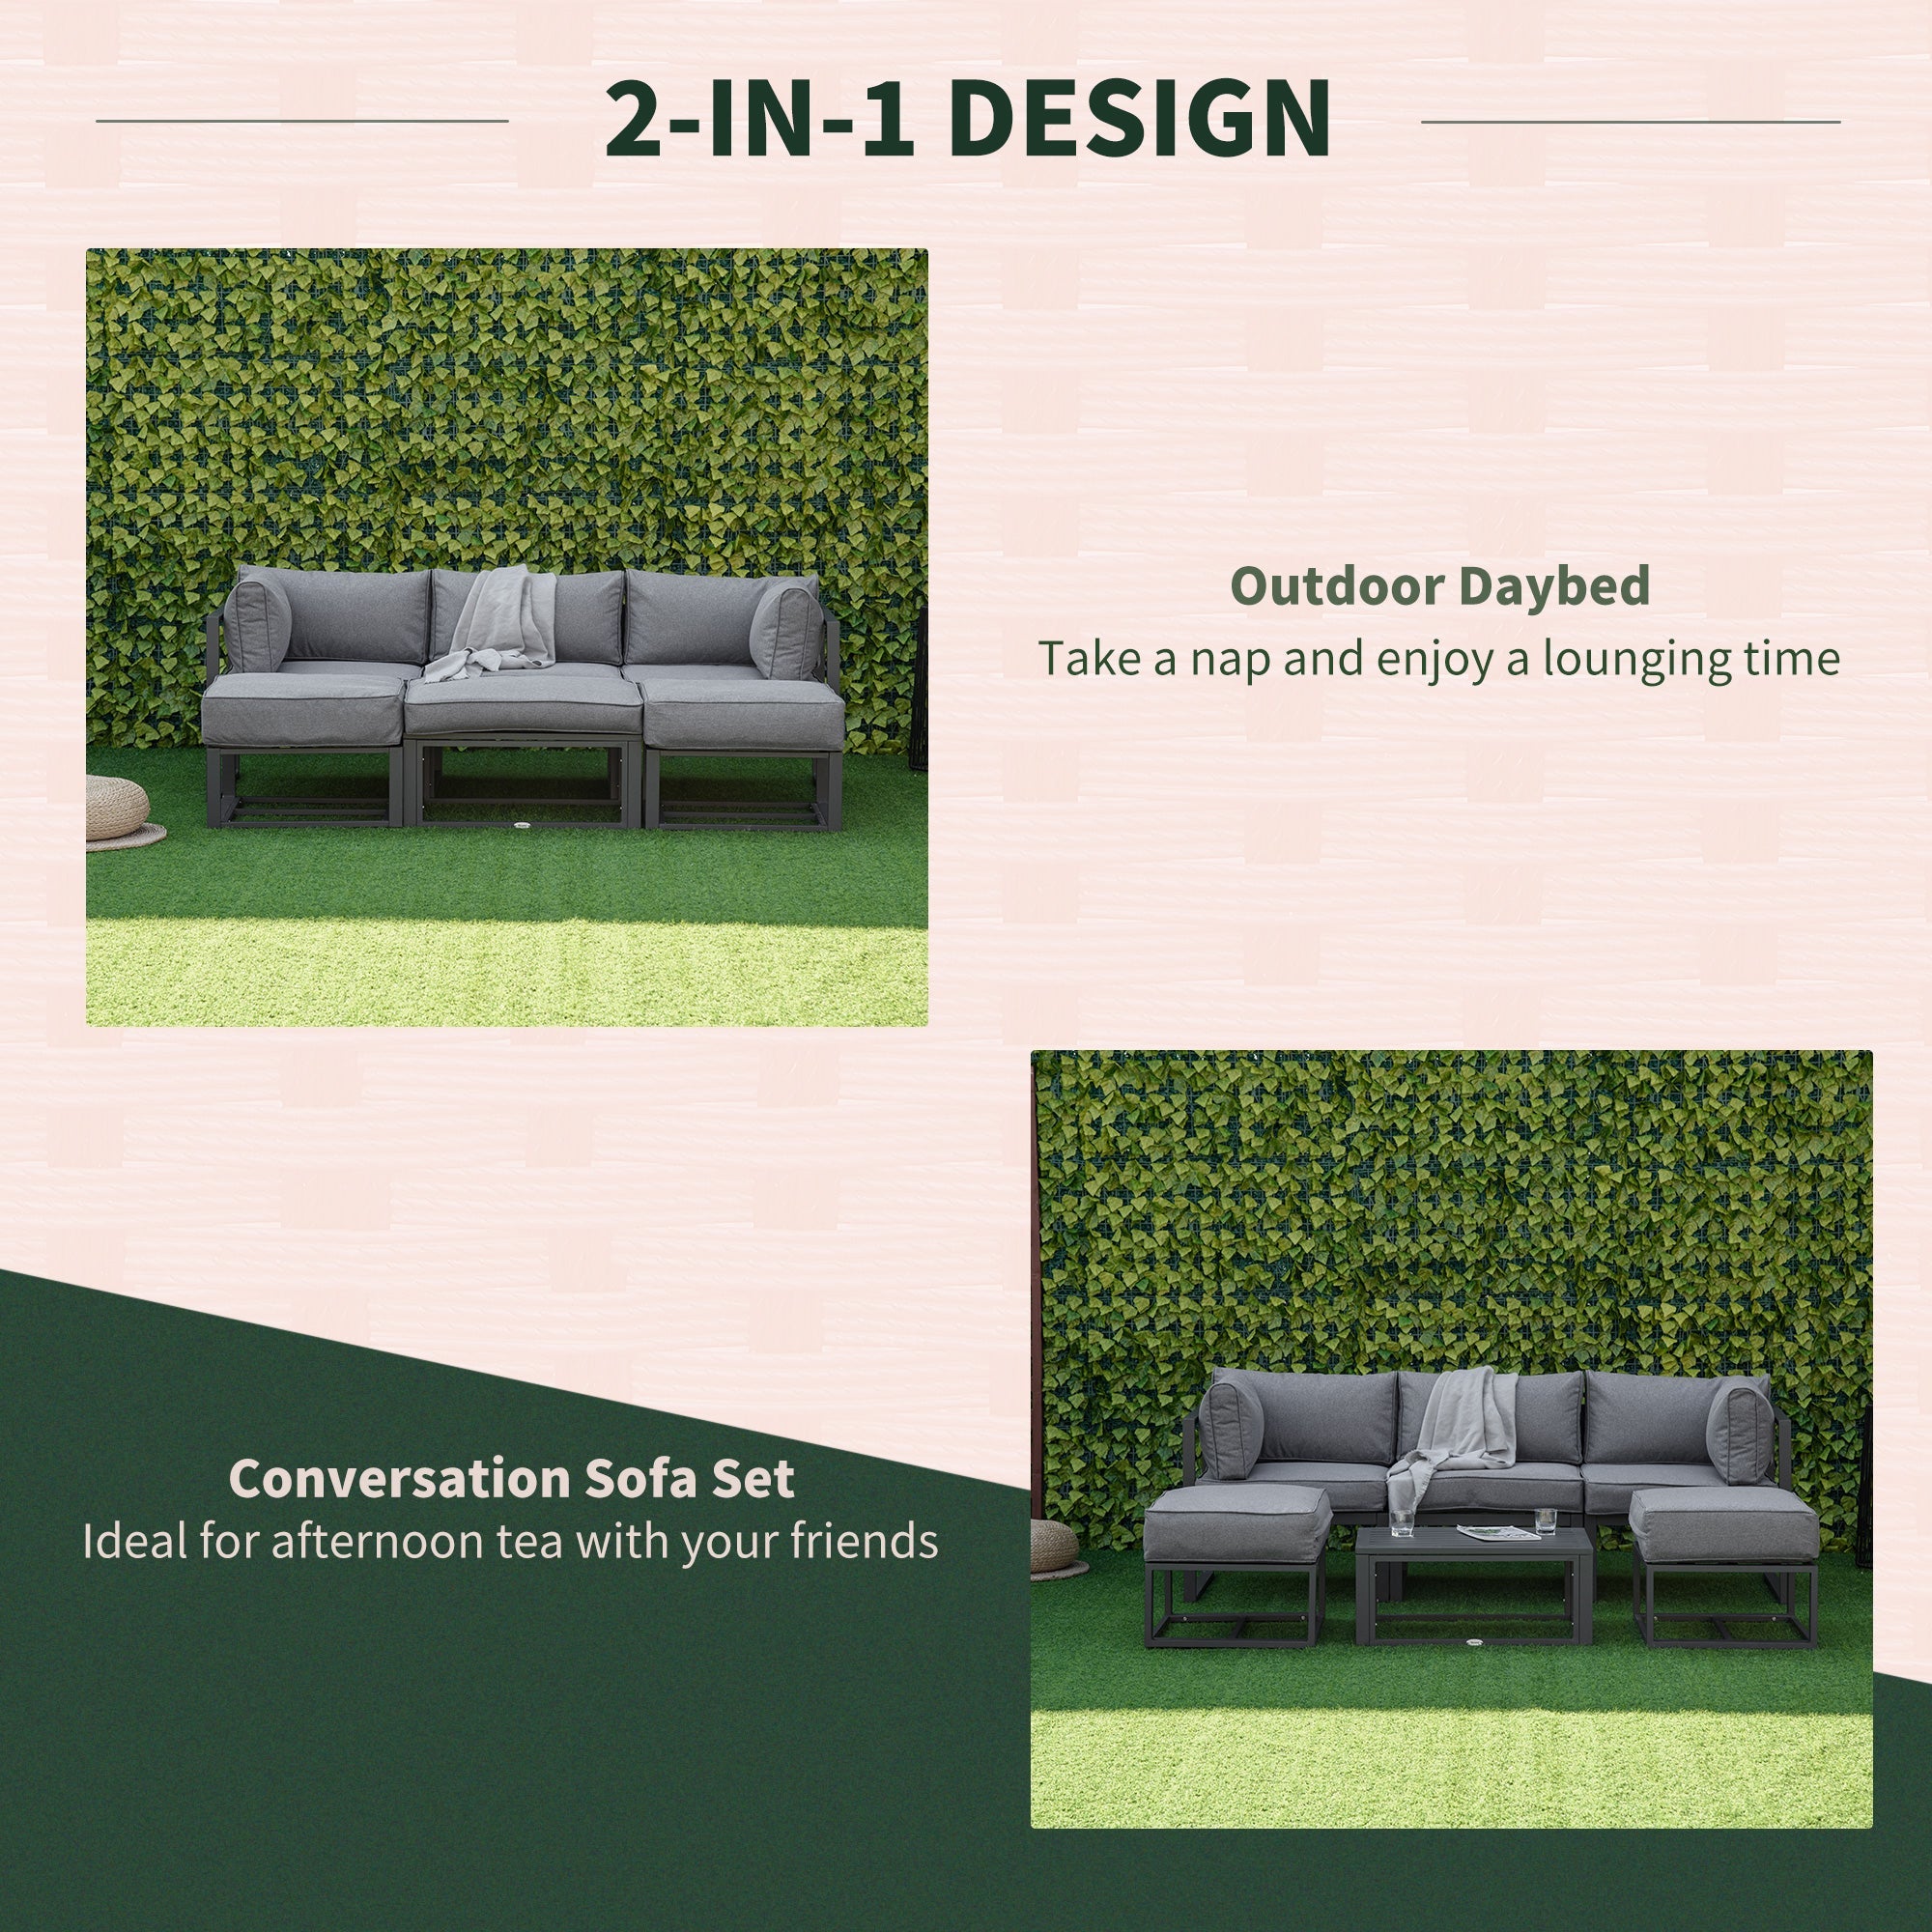 Garden Daybed, 6 Piece Outdoor Sectional Sofa Set, Aluminum Patio Conversation Furniture Set with Coffee Table, Footstool and Cushions, Grey-3